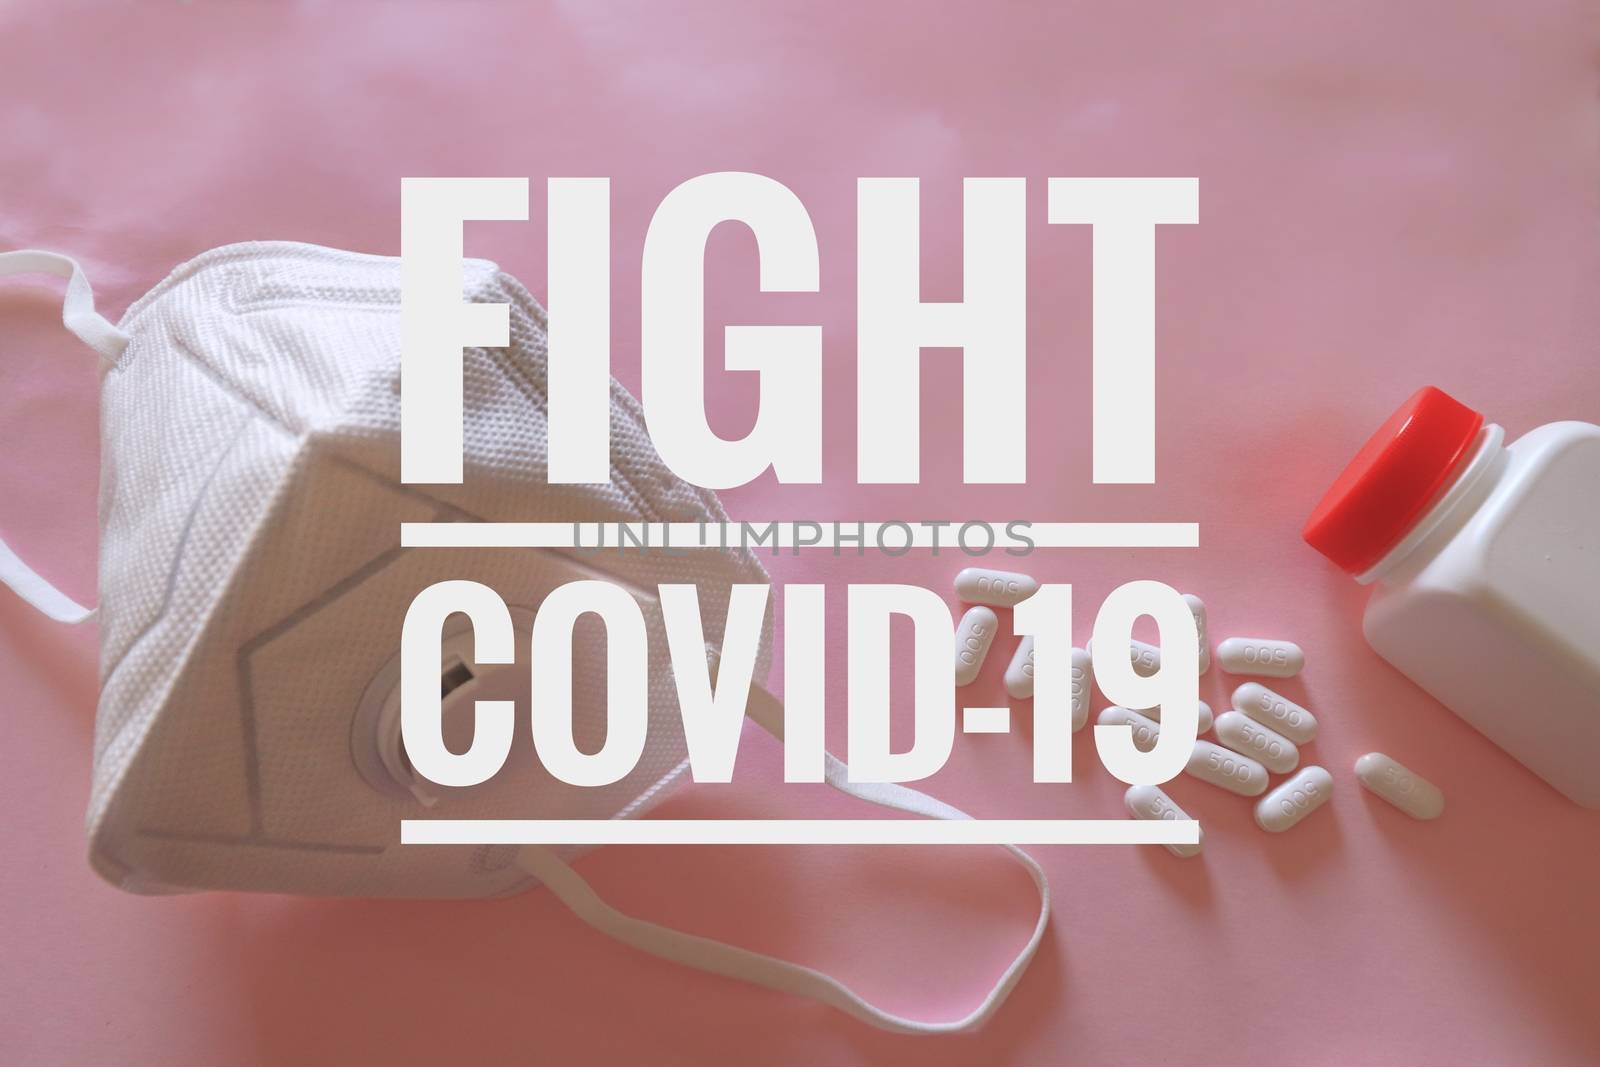 N95 mask against a pink background with the words Fight Covid-19 written on it to raise awareness in fighting the corona virus global pandemic crisis